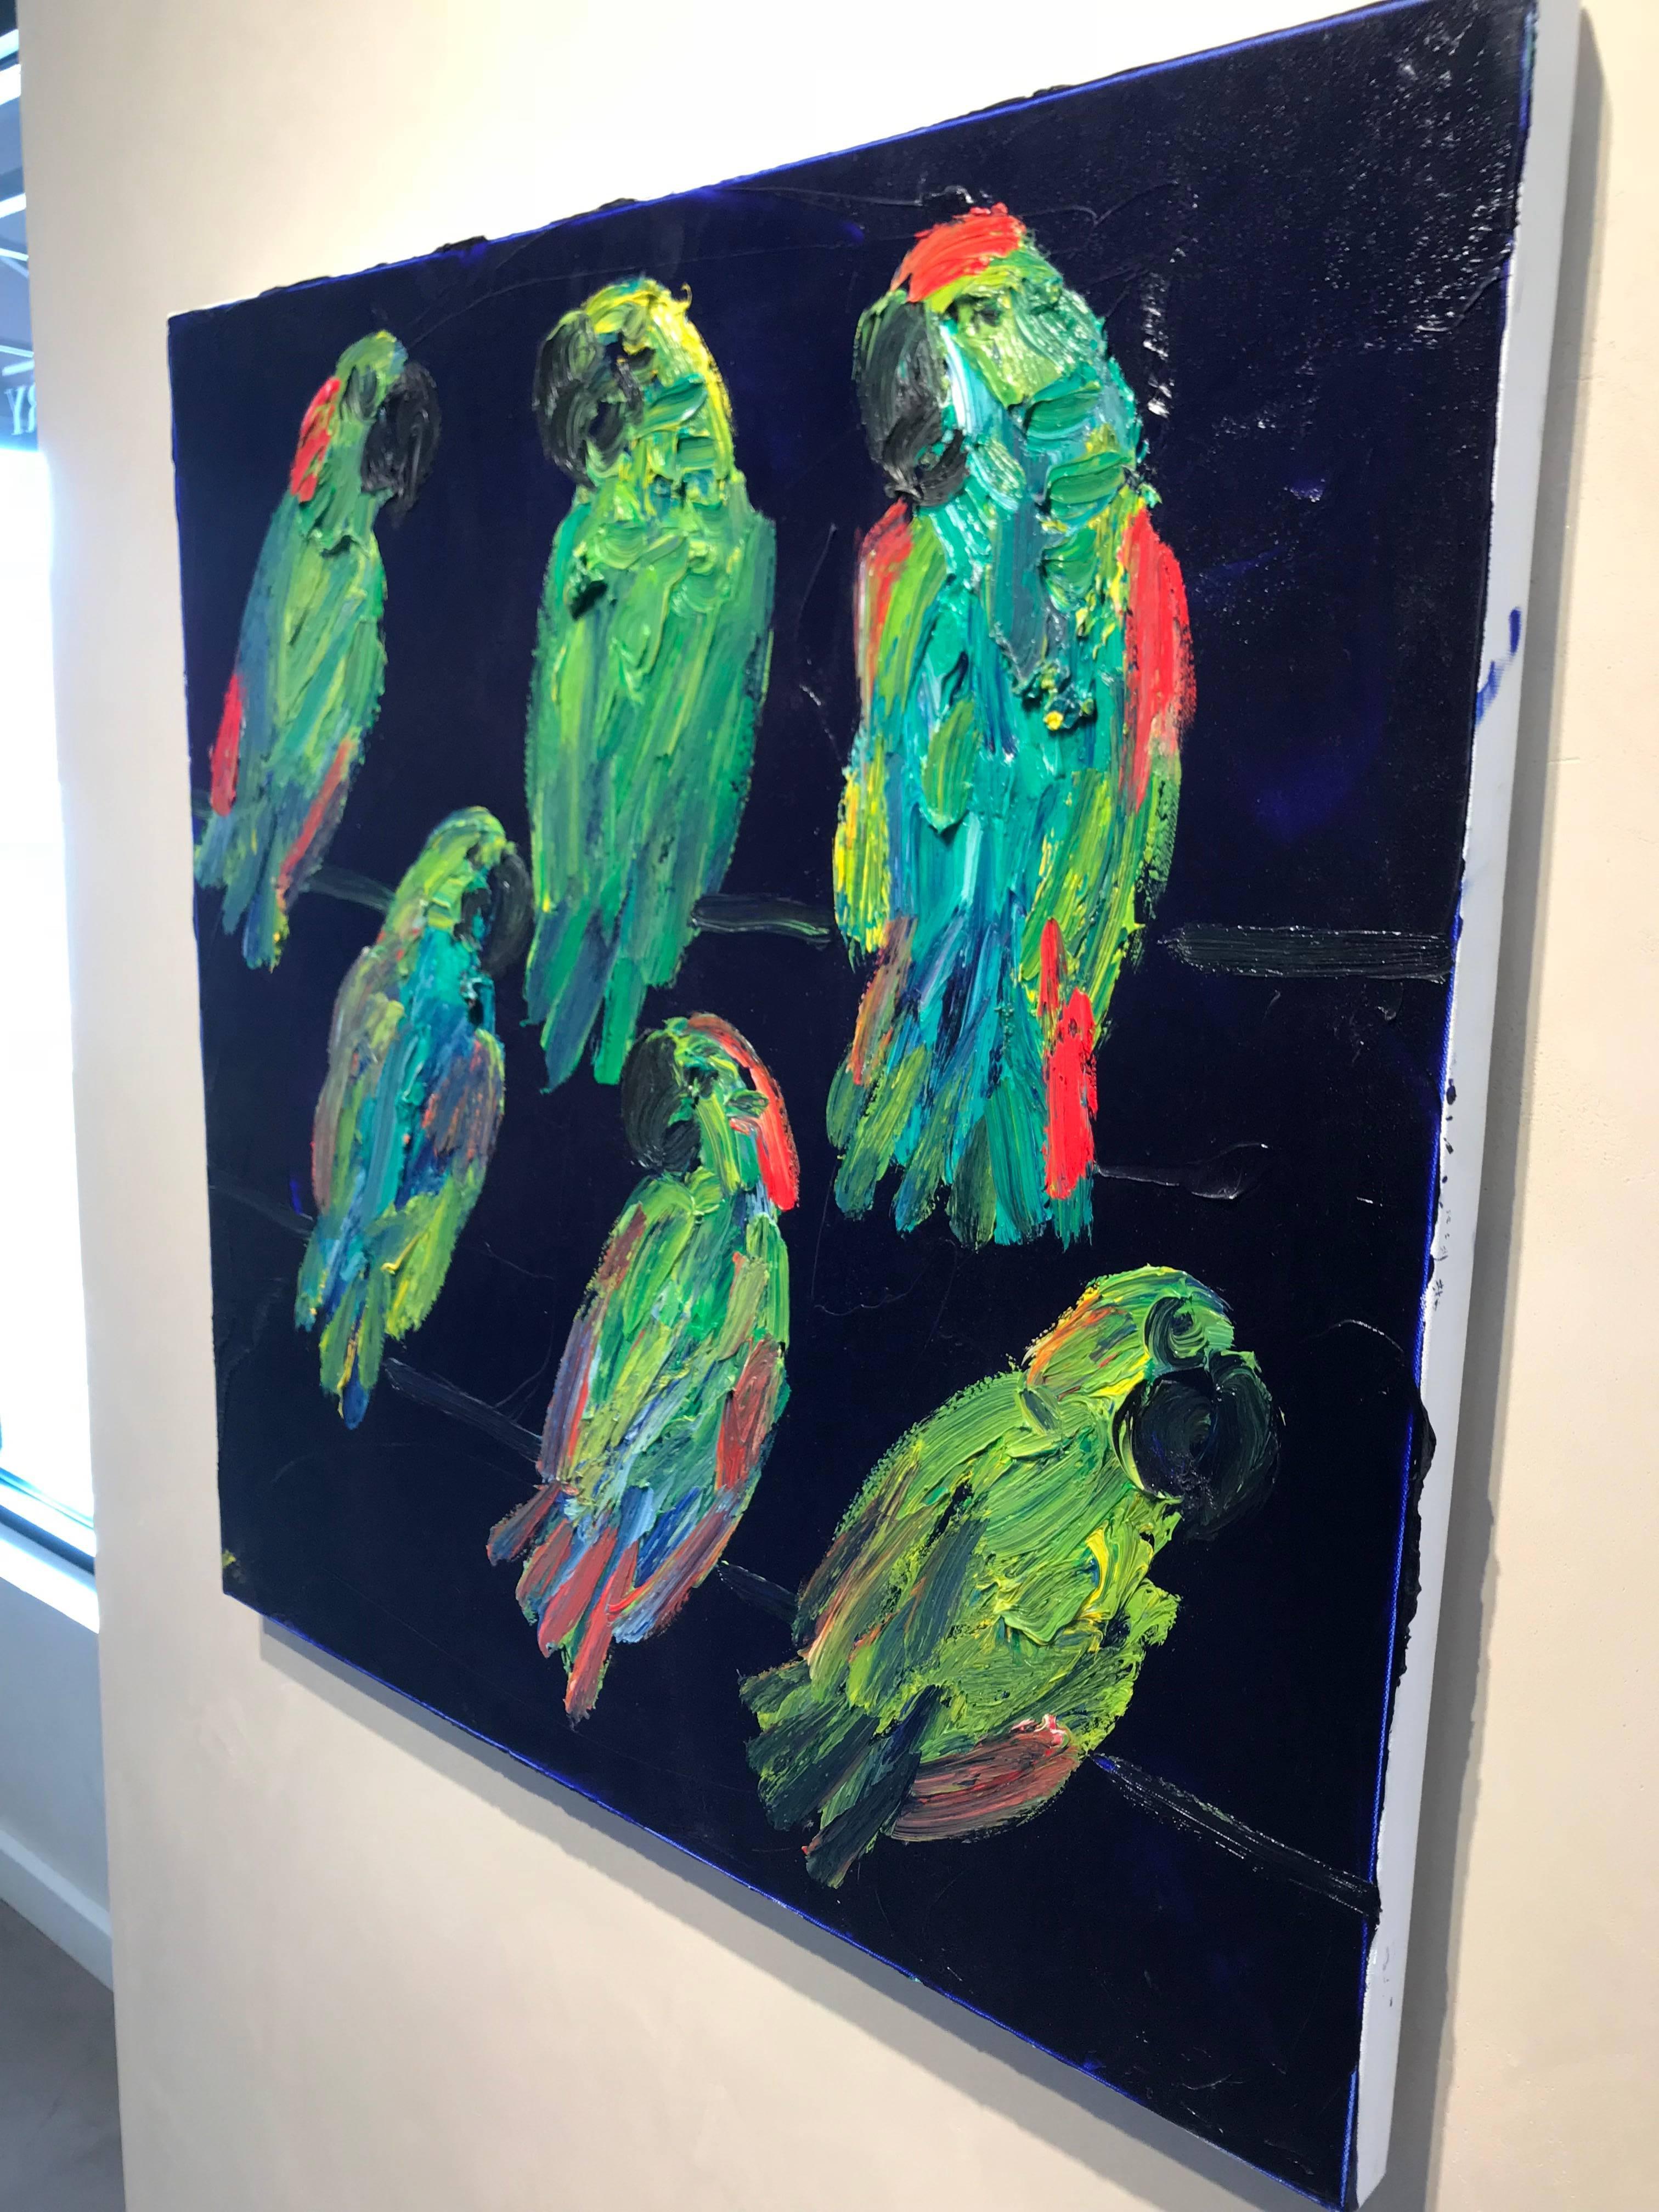 As a bird connoisseur, Hunt Slonem is able to mimic the animals' movements and textures in his Neo-Expressionist paintings of birds. This painting is of six green and yellow amazon parrots on a dark blue background.
Known for his repetitious Bunny